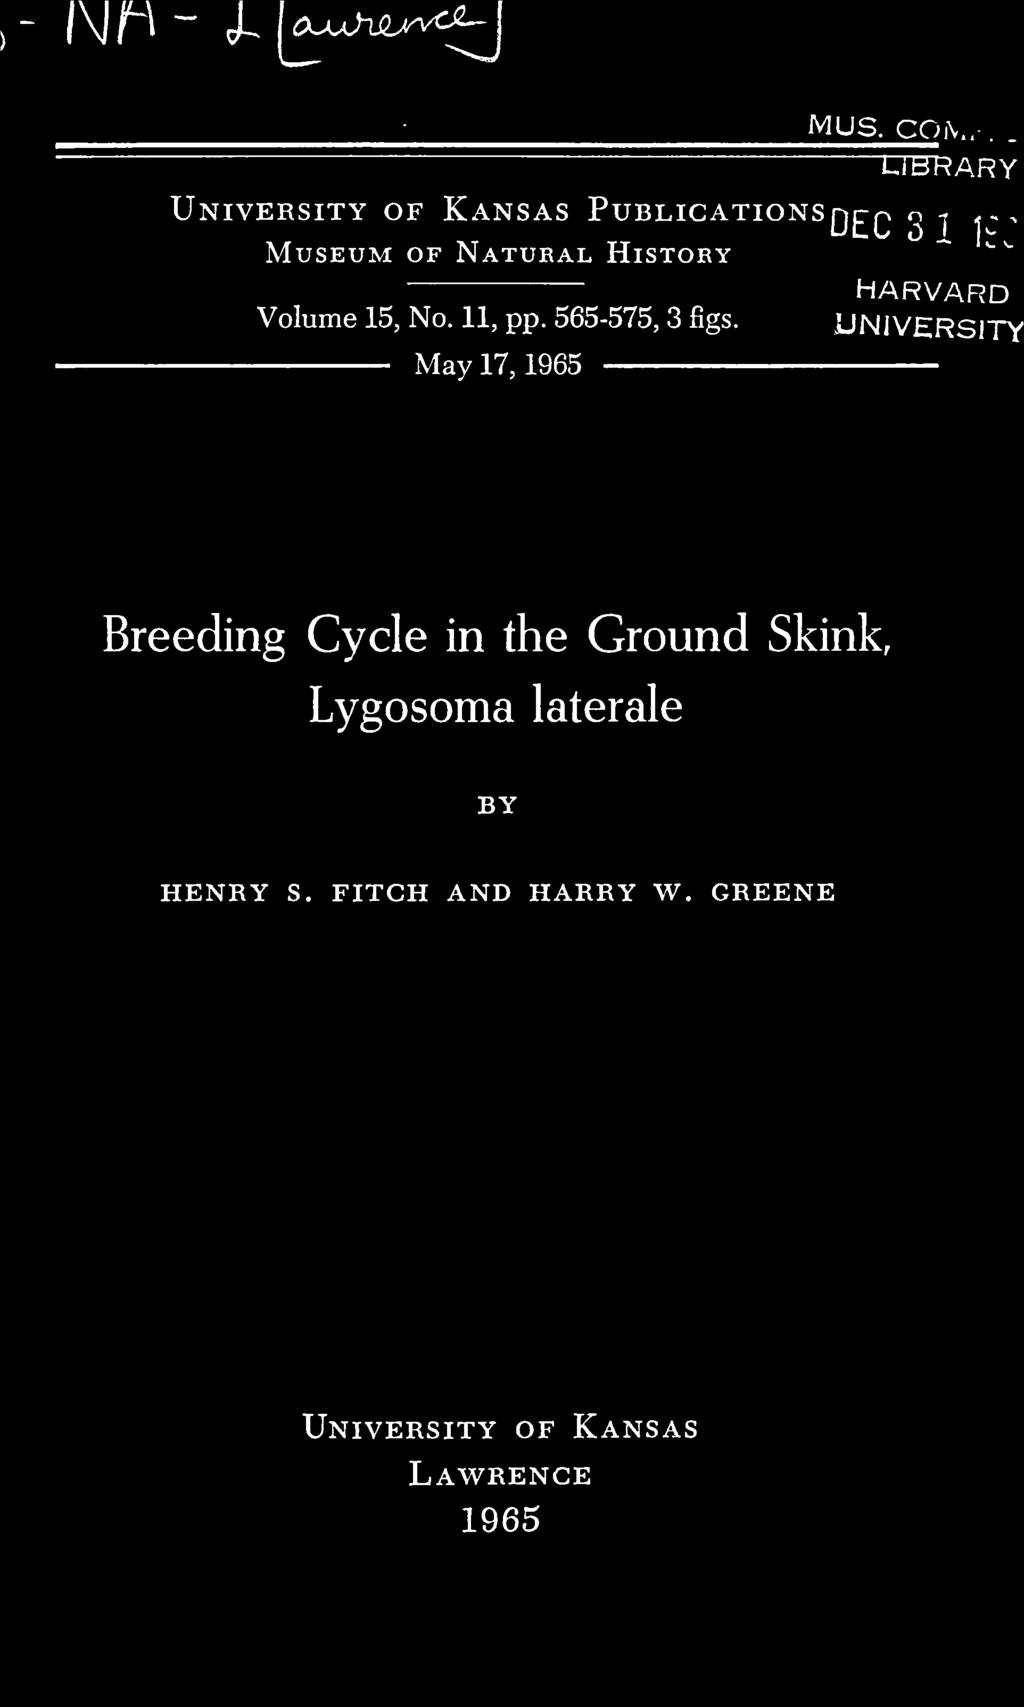 May 17, 1965 Breeding Cycle in the Ground Skink,